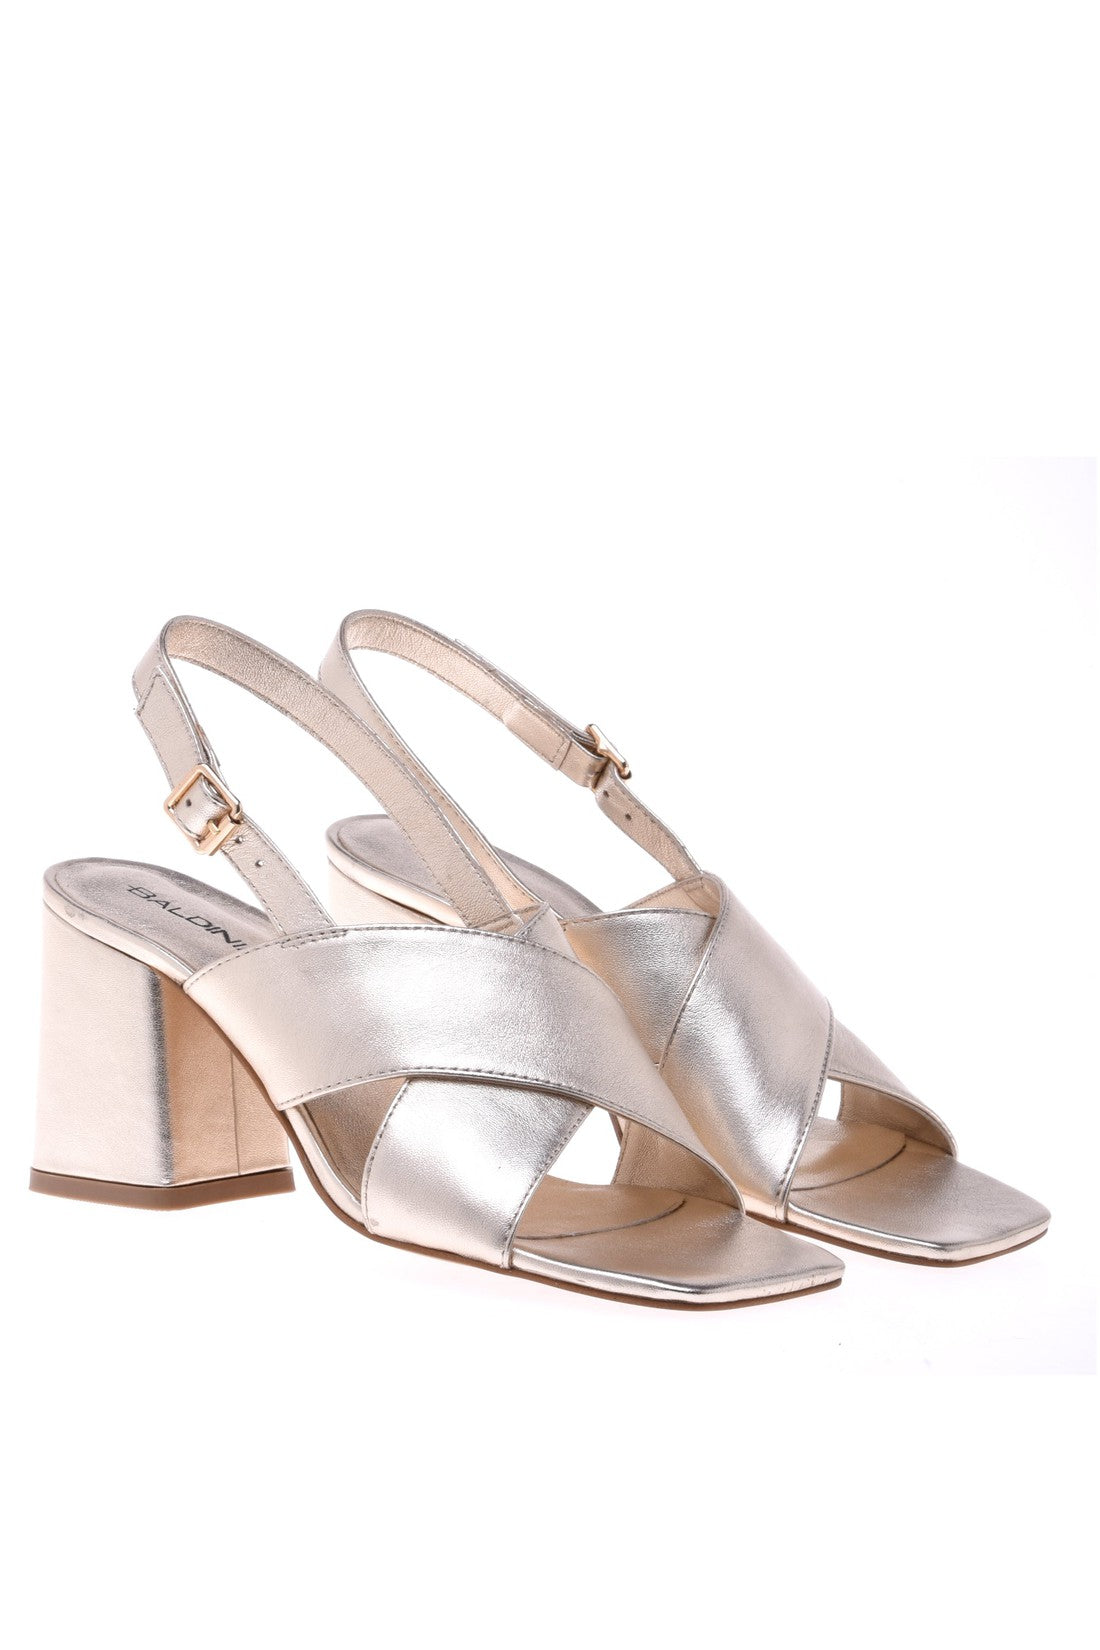 BALDININI-OUTLET-SALE-Sandal-in-laminated-platinum-nappa-leather-Sandalen-ARCHIVE-COLLECTION-3.jpg